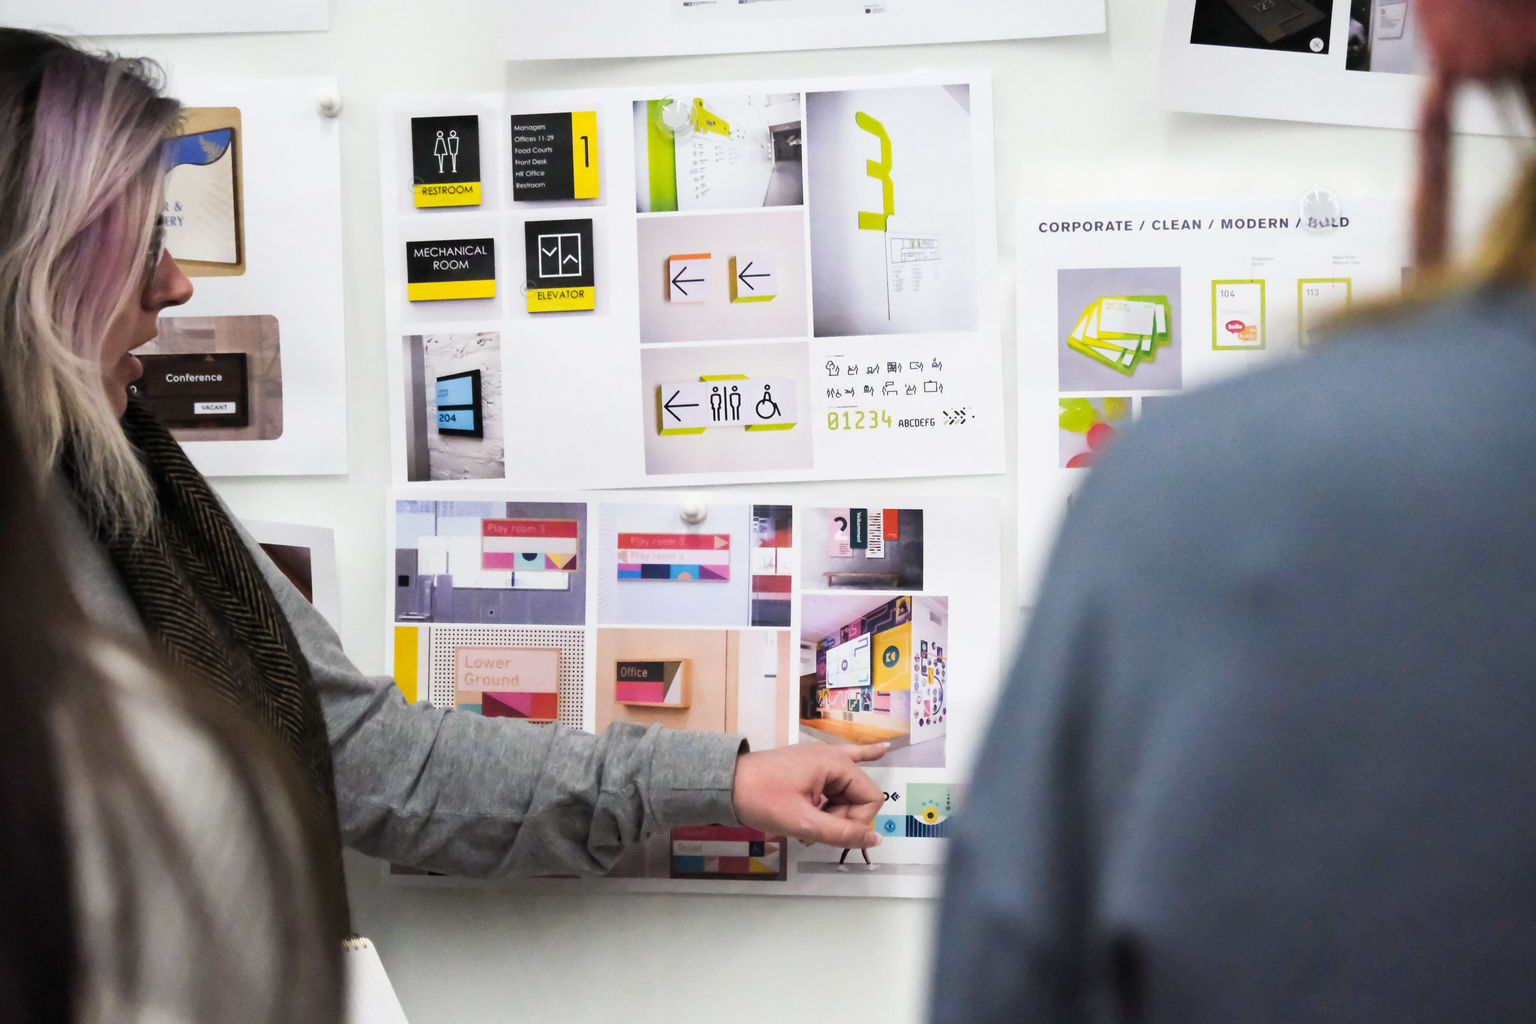 Experiential designers are critiquing their signage and graphic design concepts.